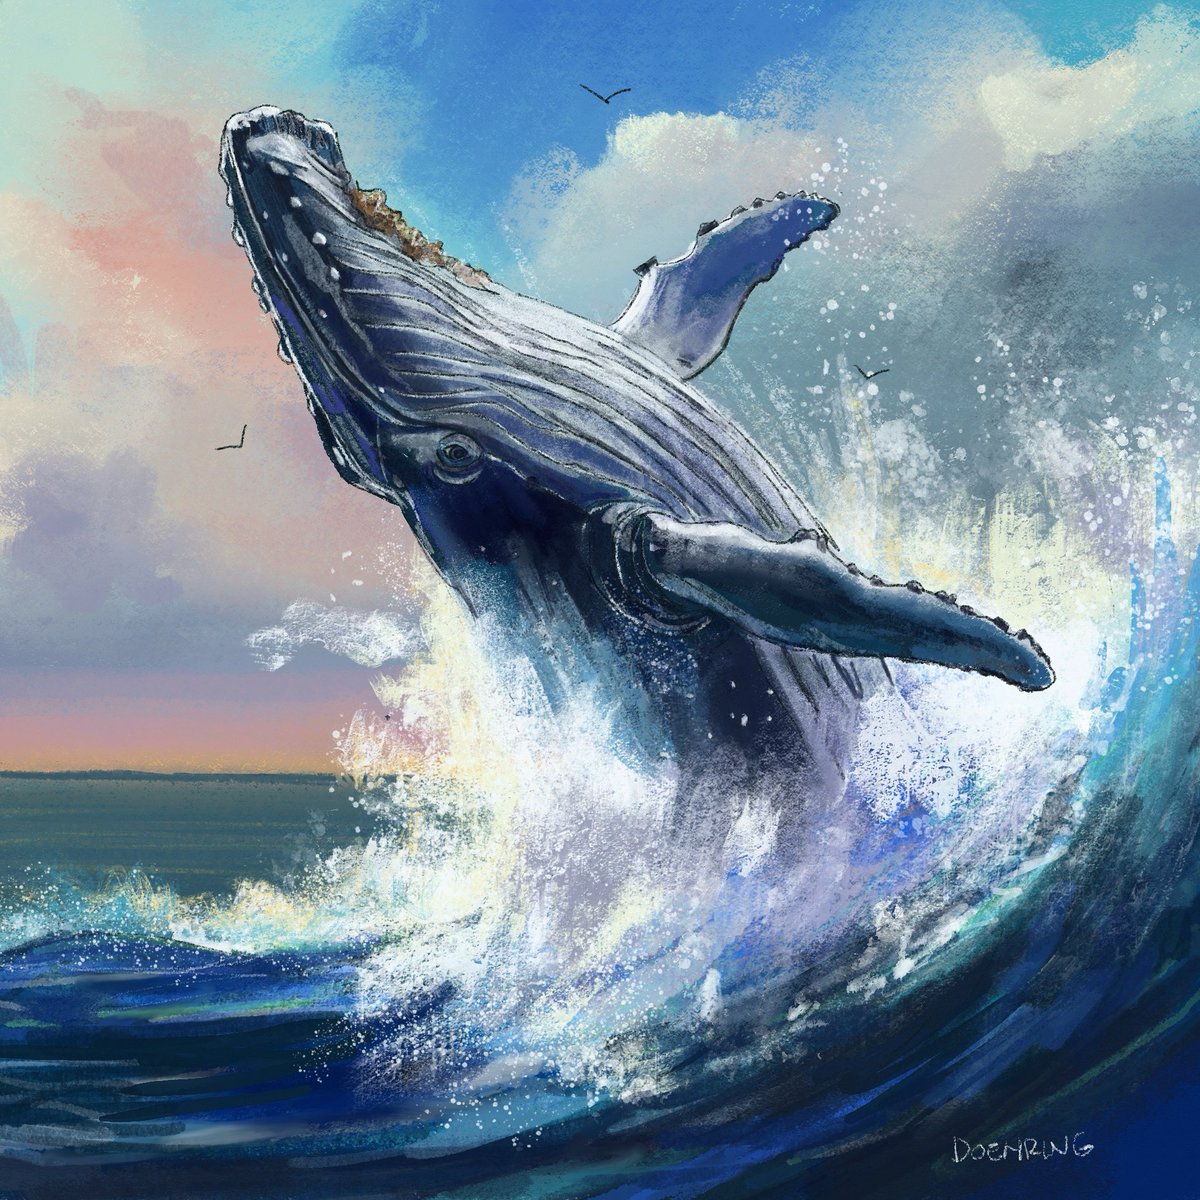 Majestic whale 🐋 #kidlitart #whales #ocean #nature #picturebooks #illustration #whaleart #fish #underwater #sealife #nonfiction